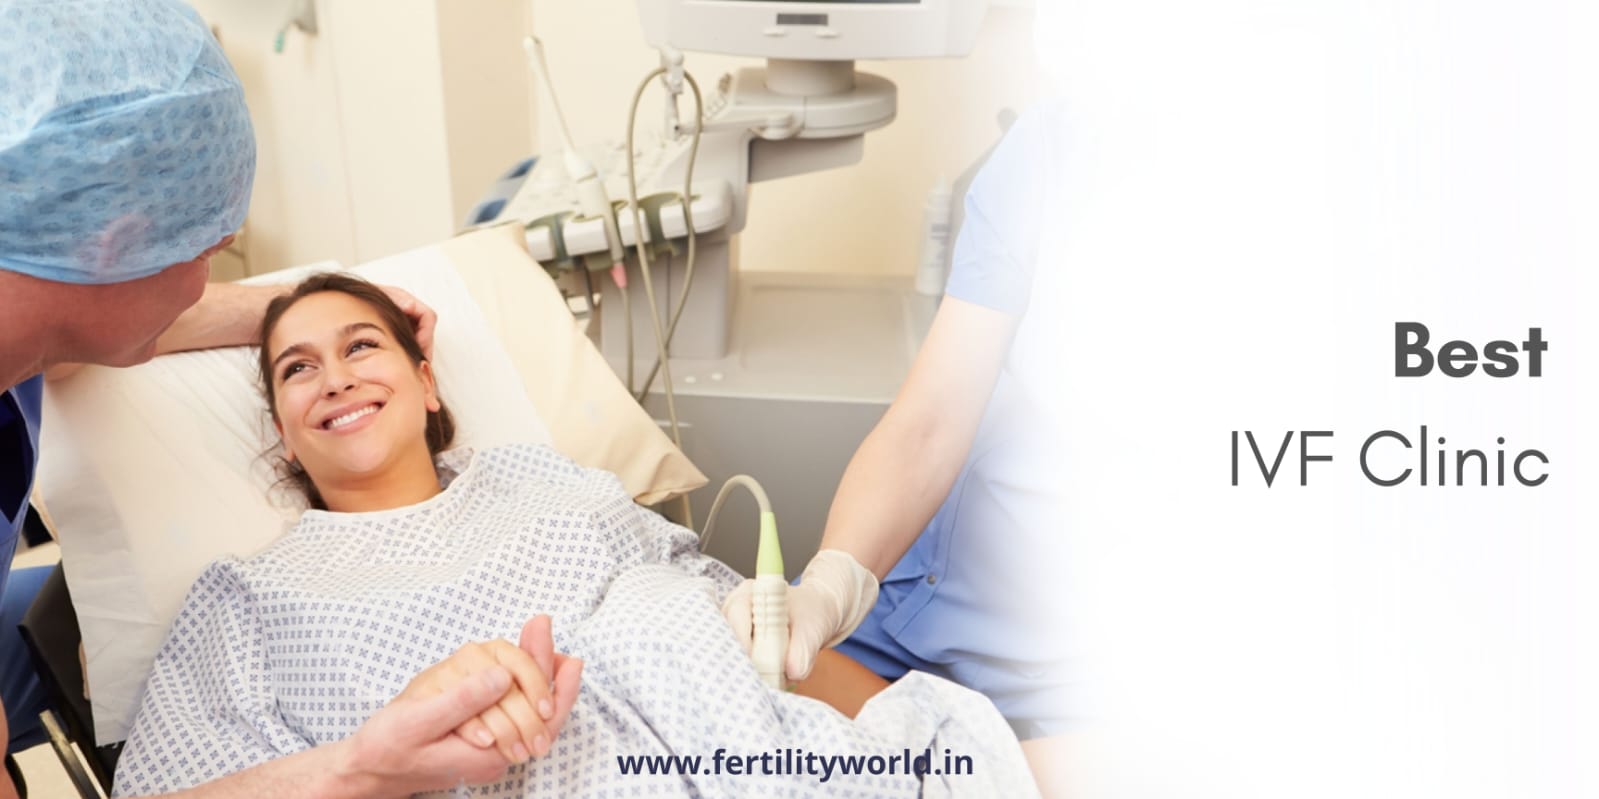 Unique features of the Best IVF Clinic in Dubai